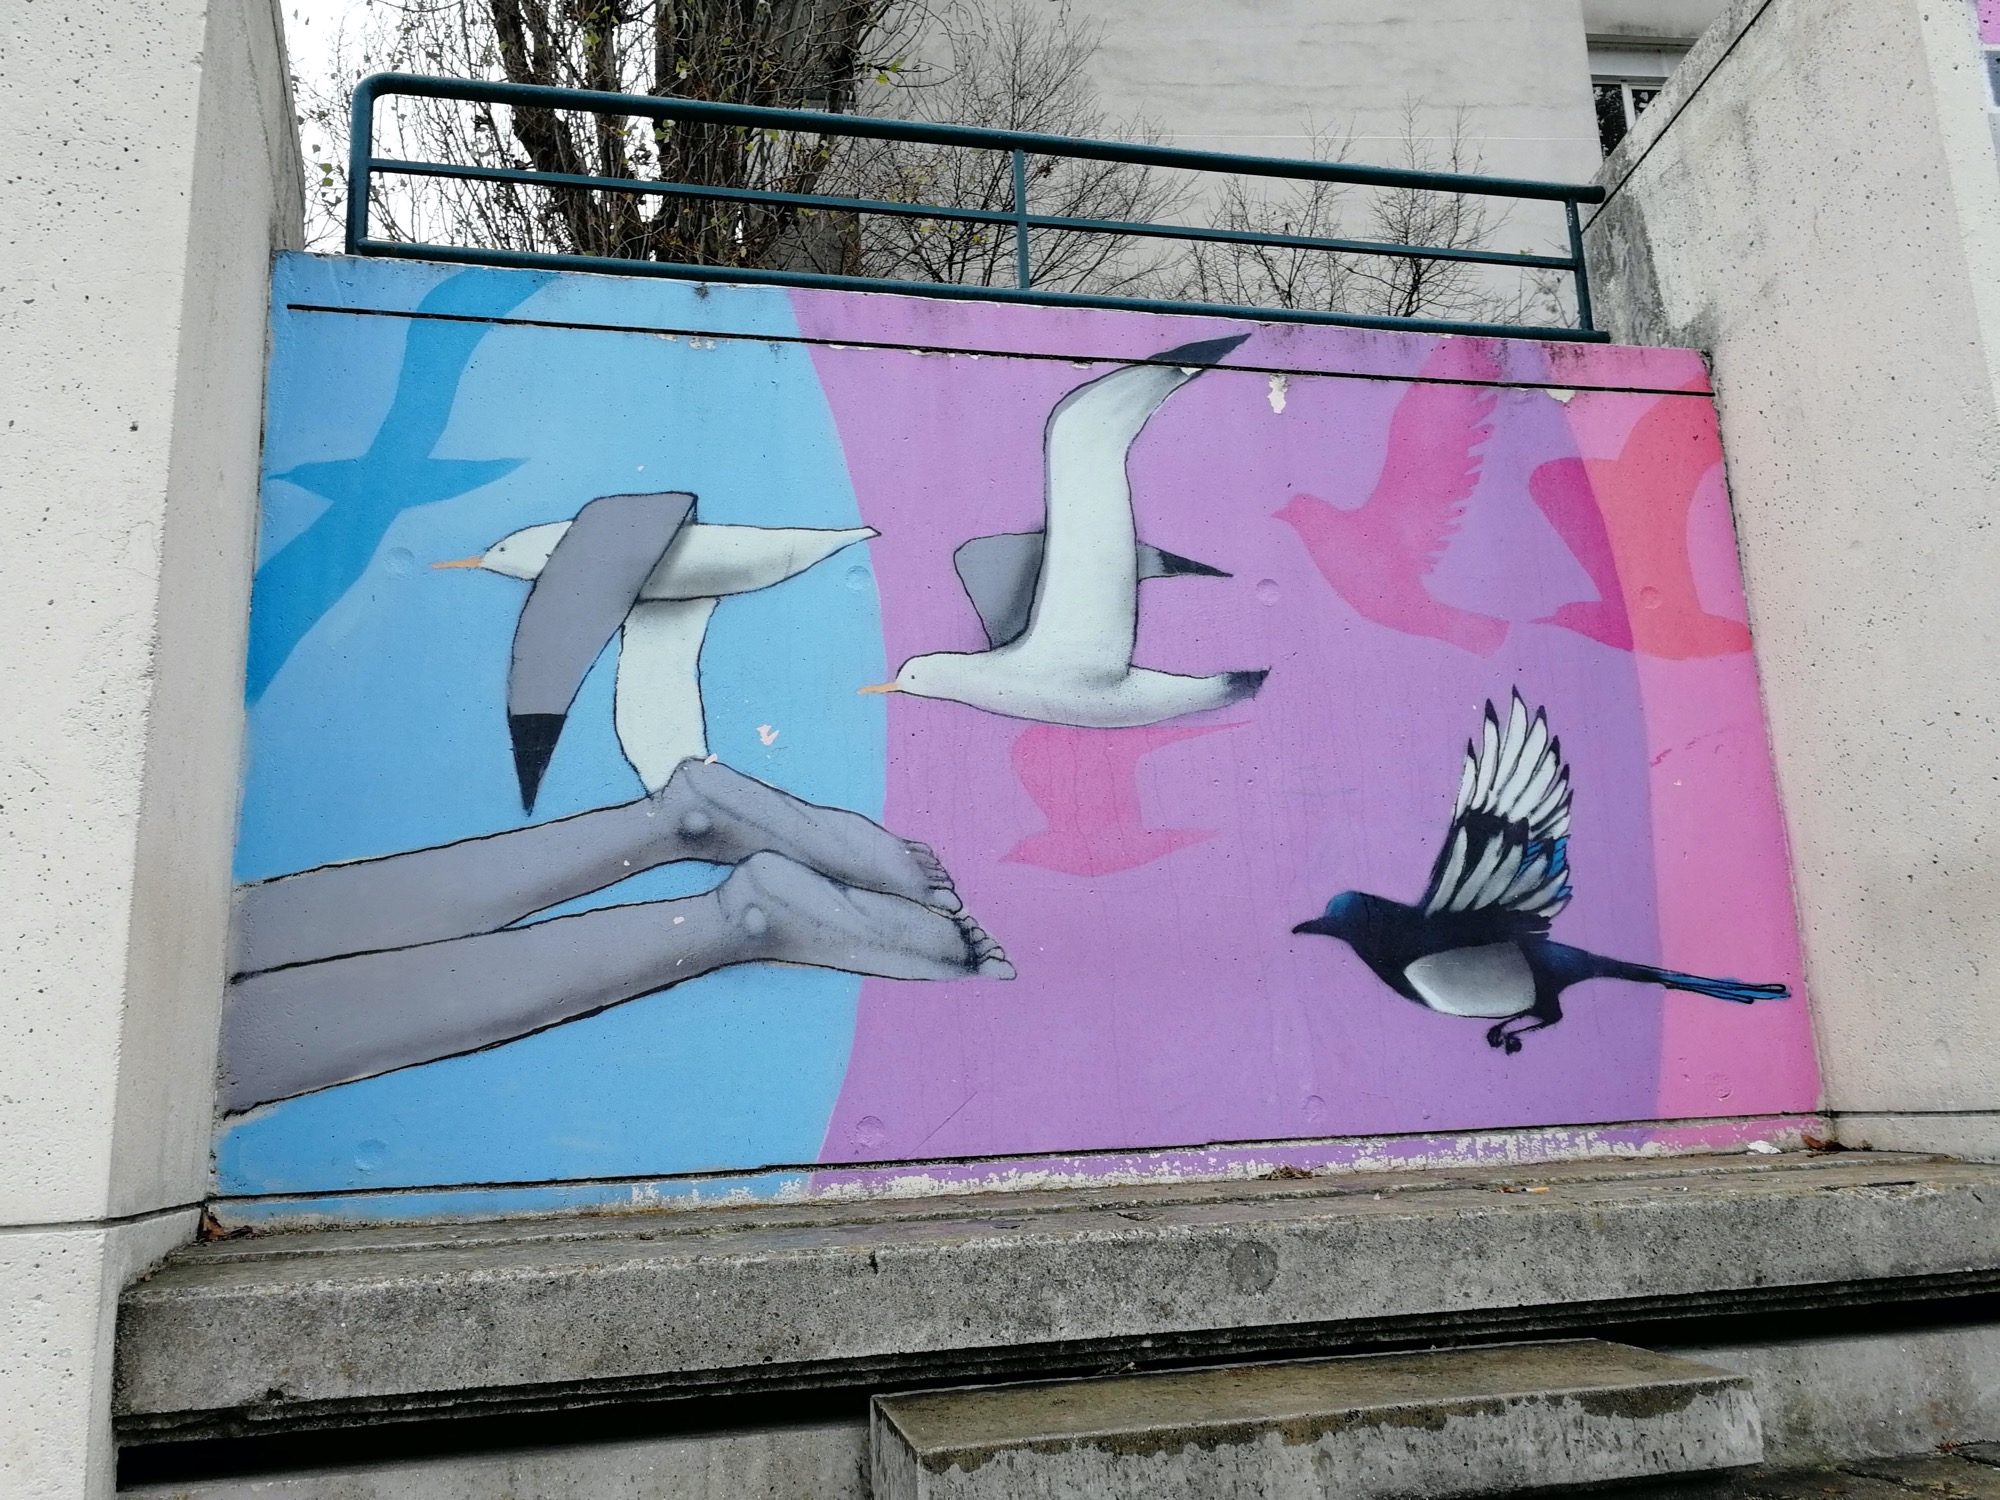 Graffiti 1147  by the artist Seth captured by Rabot in Paris France